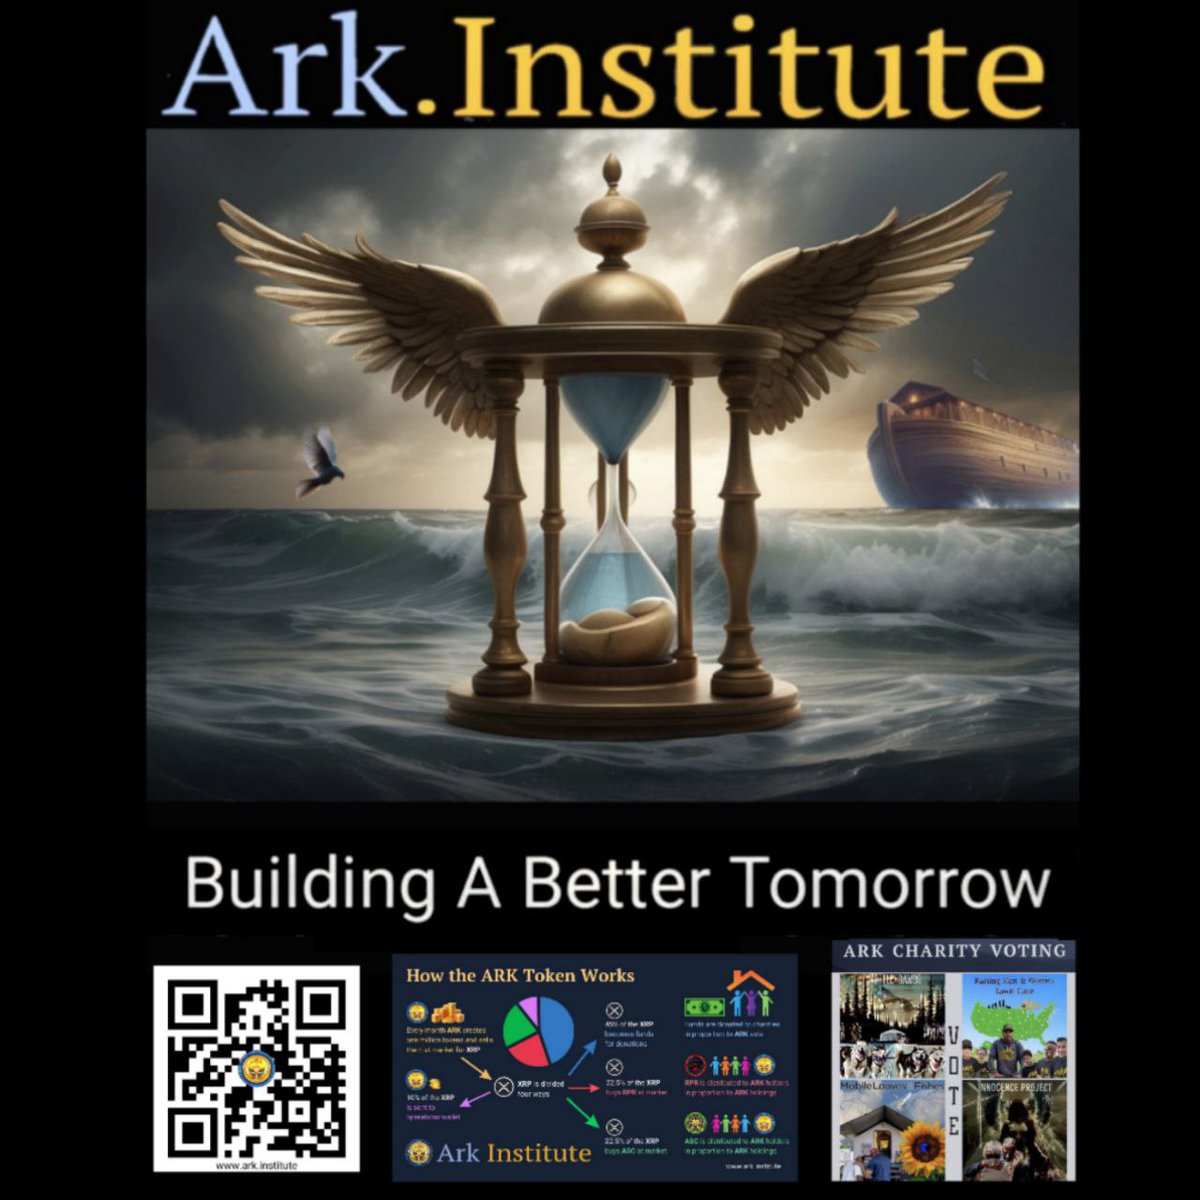 @MrBeast  join  $ARK and help us #BuildABetterTomorrow
We are transformative, disruption for Charitable Funding mechanisms available for everyone involved in doing #TheGoodWork  Our #Blockchain Innovation utilizes the a special voting tool developed by @TheReaperCoin  learn more